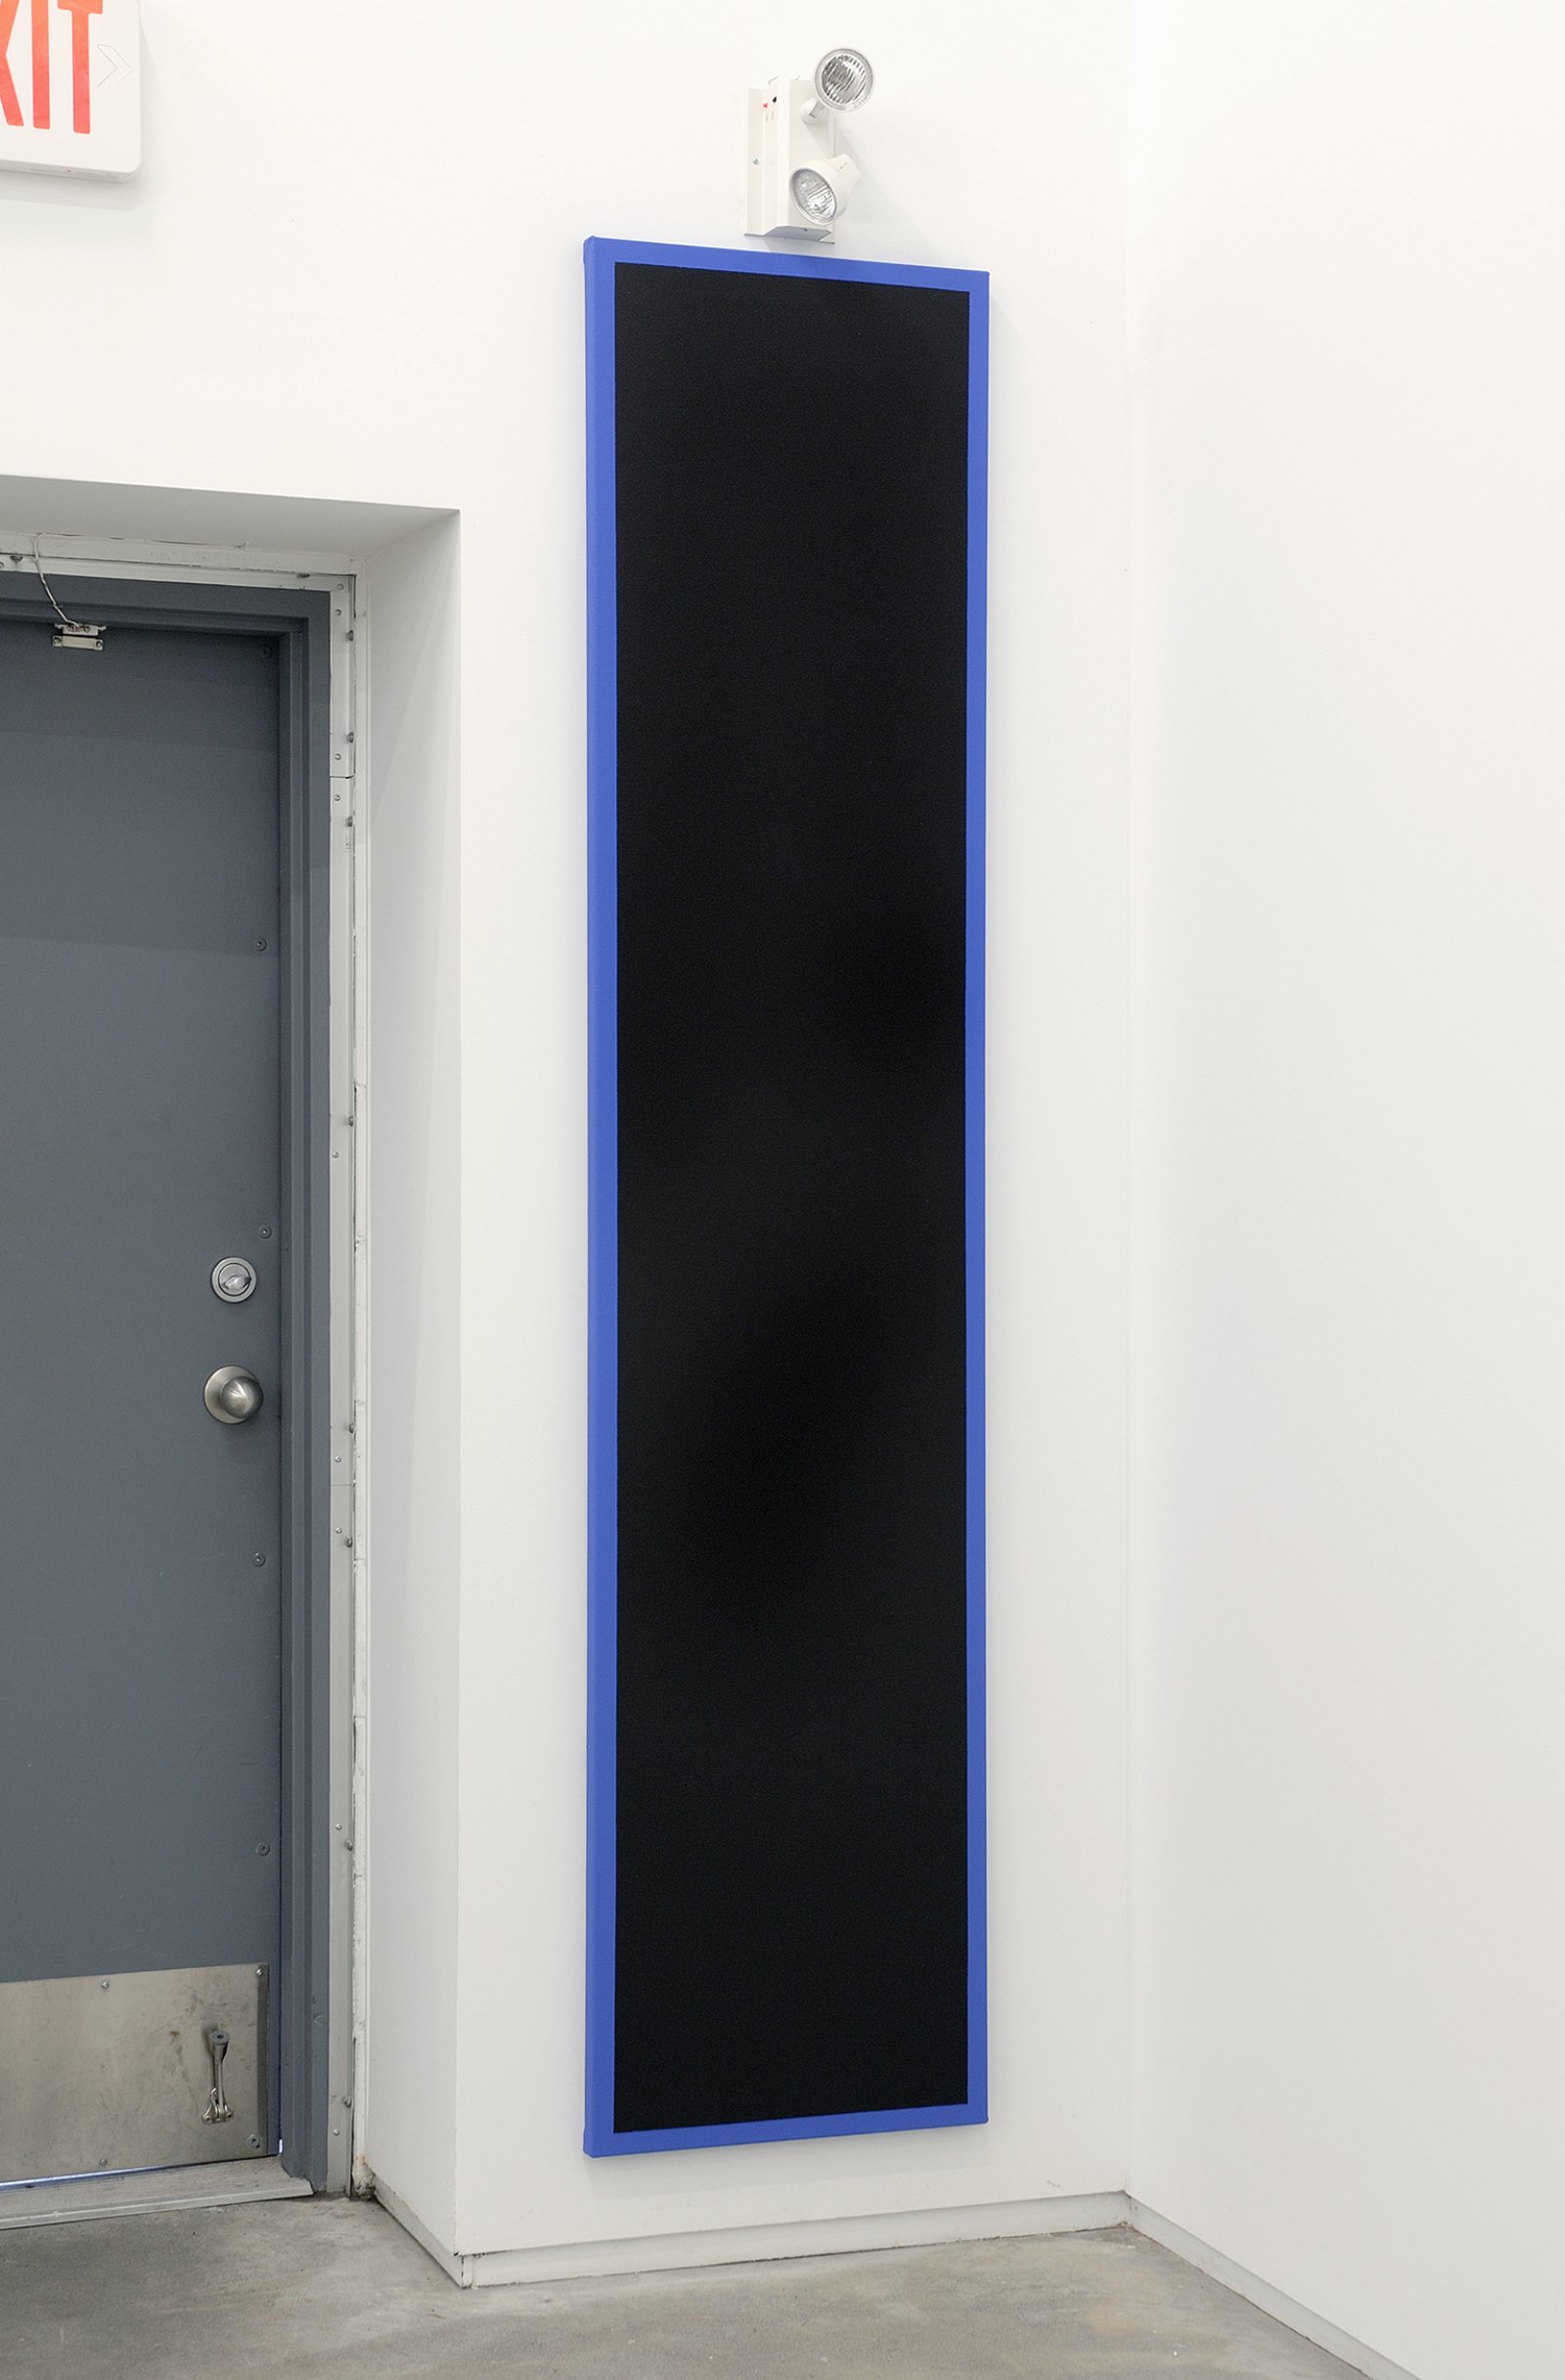 Ian Wallace, Untitled (Black Monochrome with Blue), 1967–2007, acrylic on canvas, 90 x 20 in. (229 x 51 cm)  ​ by Ian Wallace